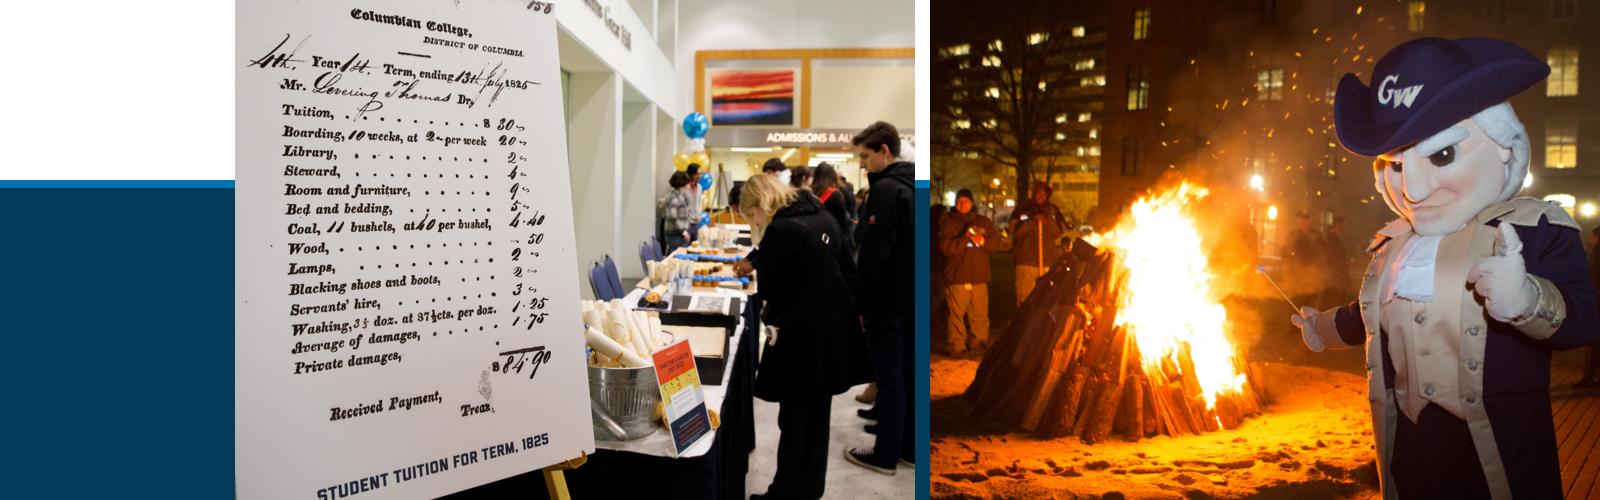 indoor event with GW historical materials on display (left) and GW's mascot roasting marshmallows at a bonfire (right) 